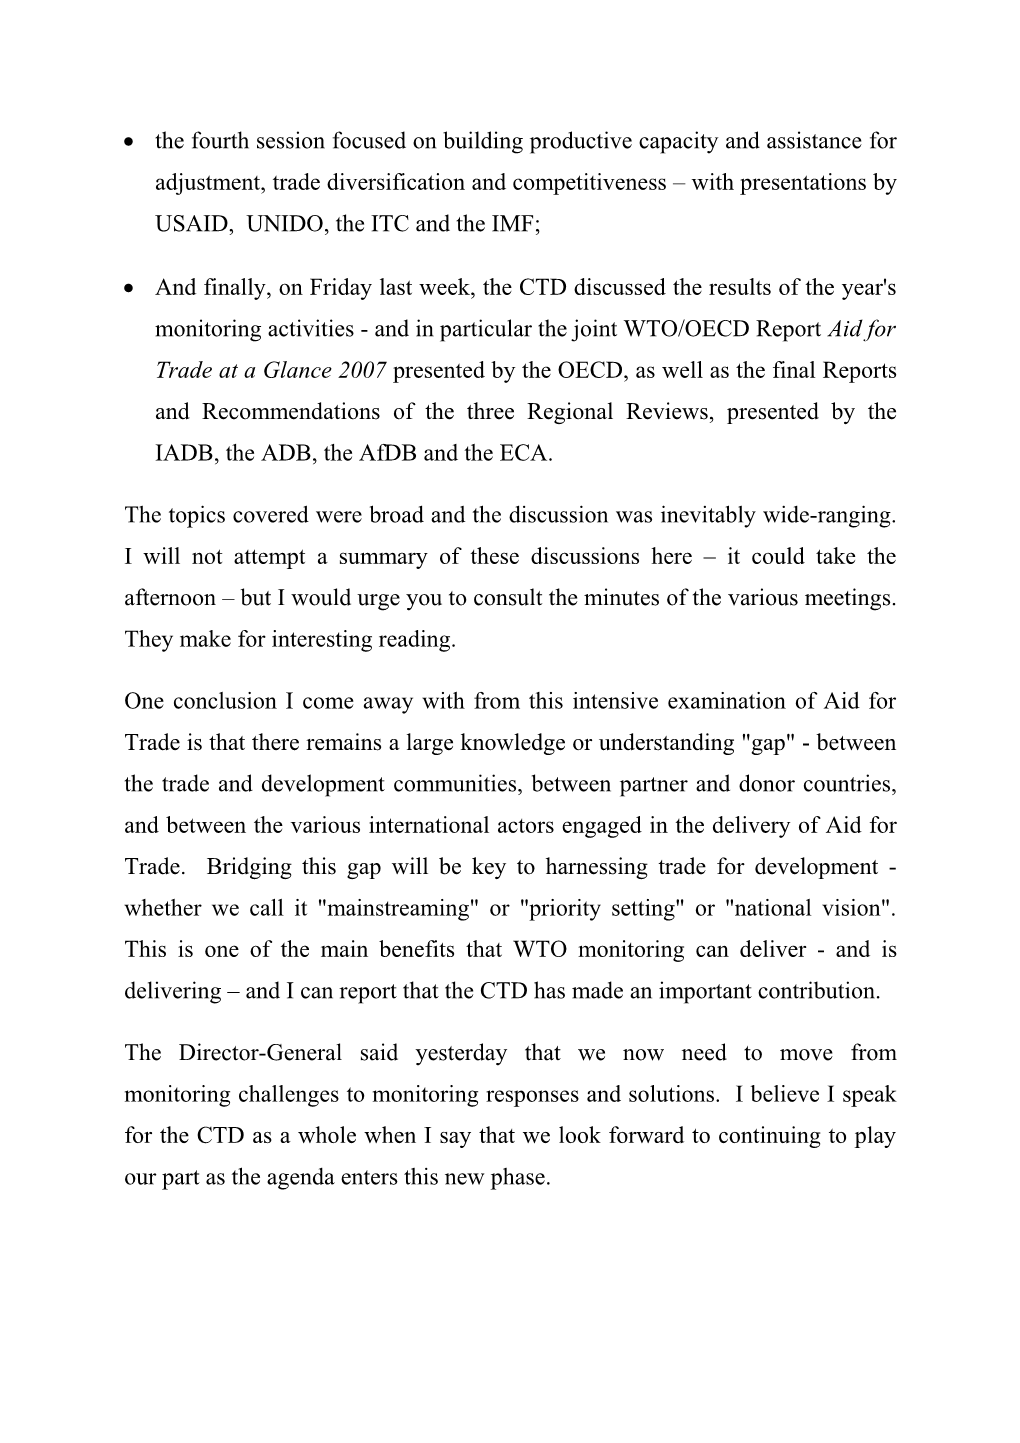 Report on the CTD's Periodic Reviews of Aid for Trade